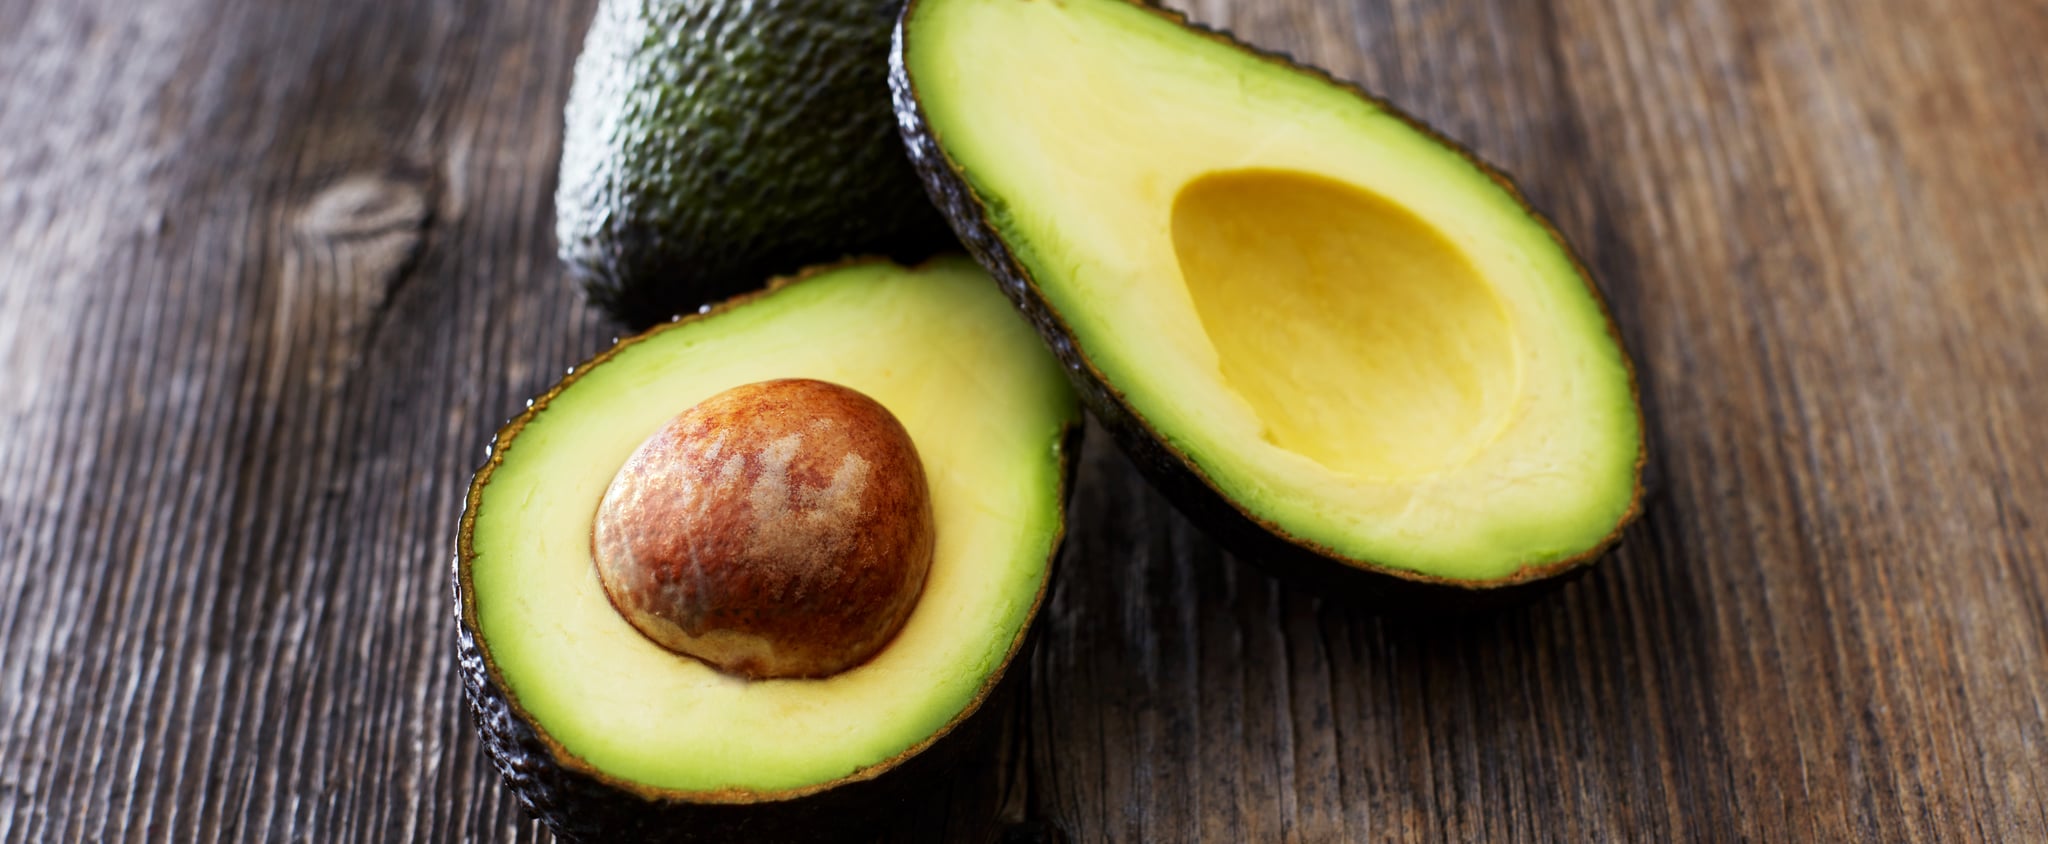 Are Avocados Good For You?